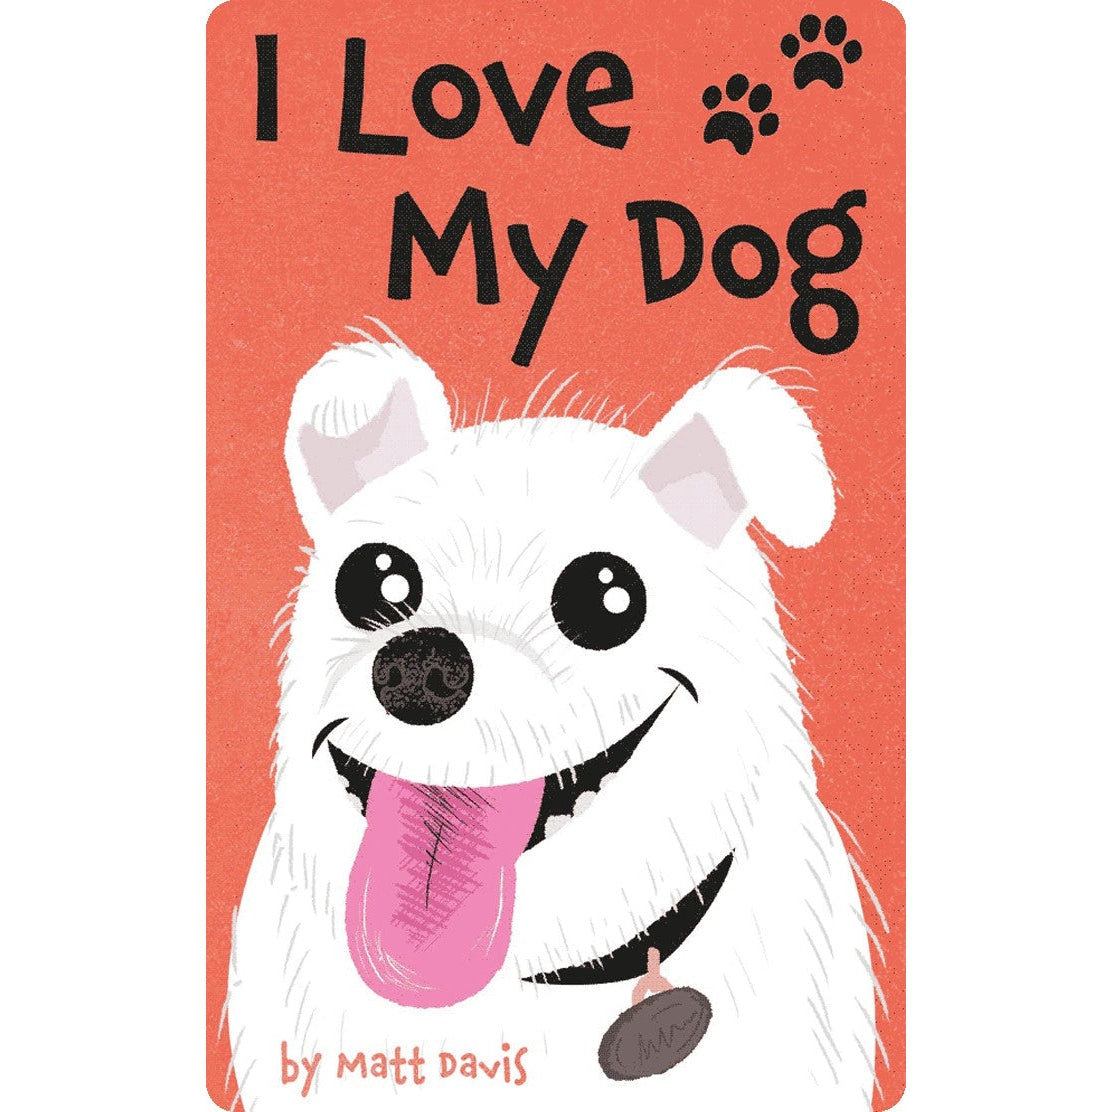 Yoto Card - I Love My Dog - Child Friendly Audio Music Card for the Yoto Player